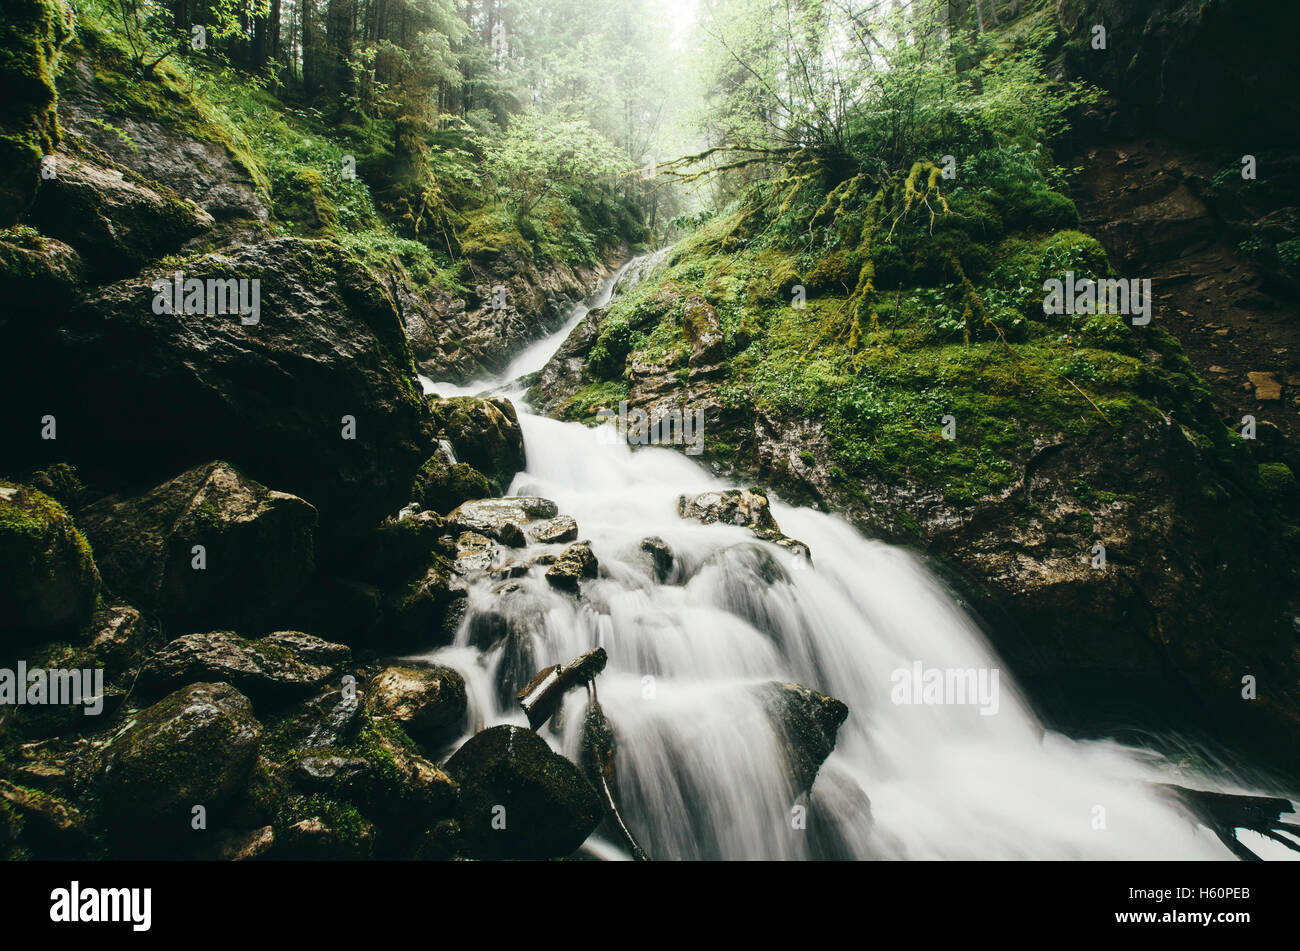 natural waterfall on stream in green forest Stock Photo